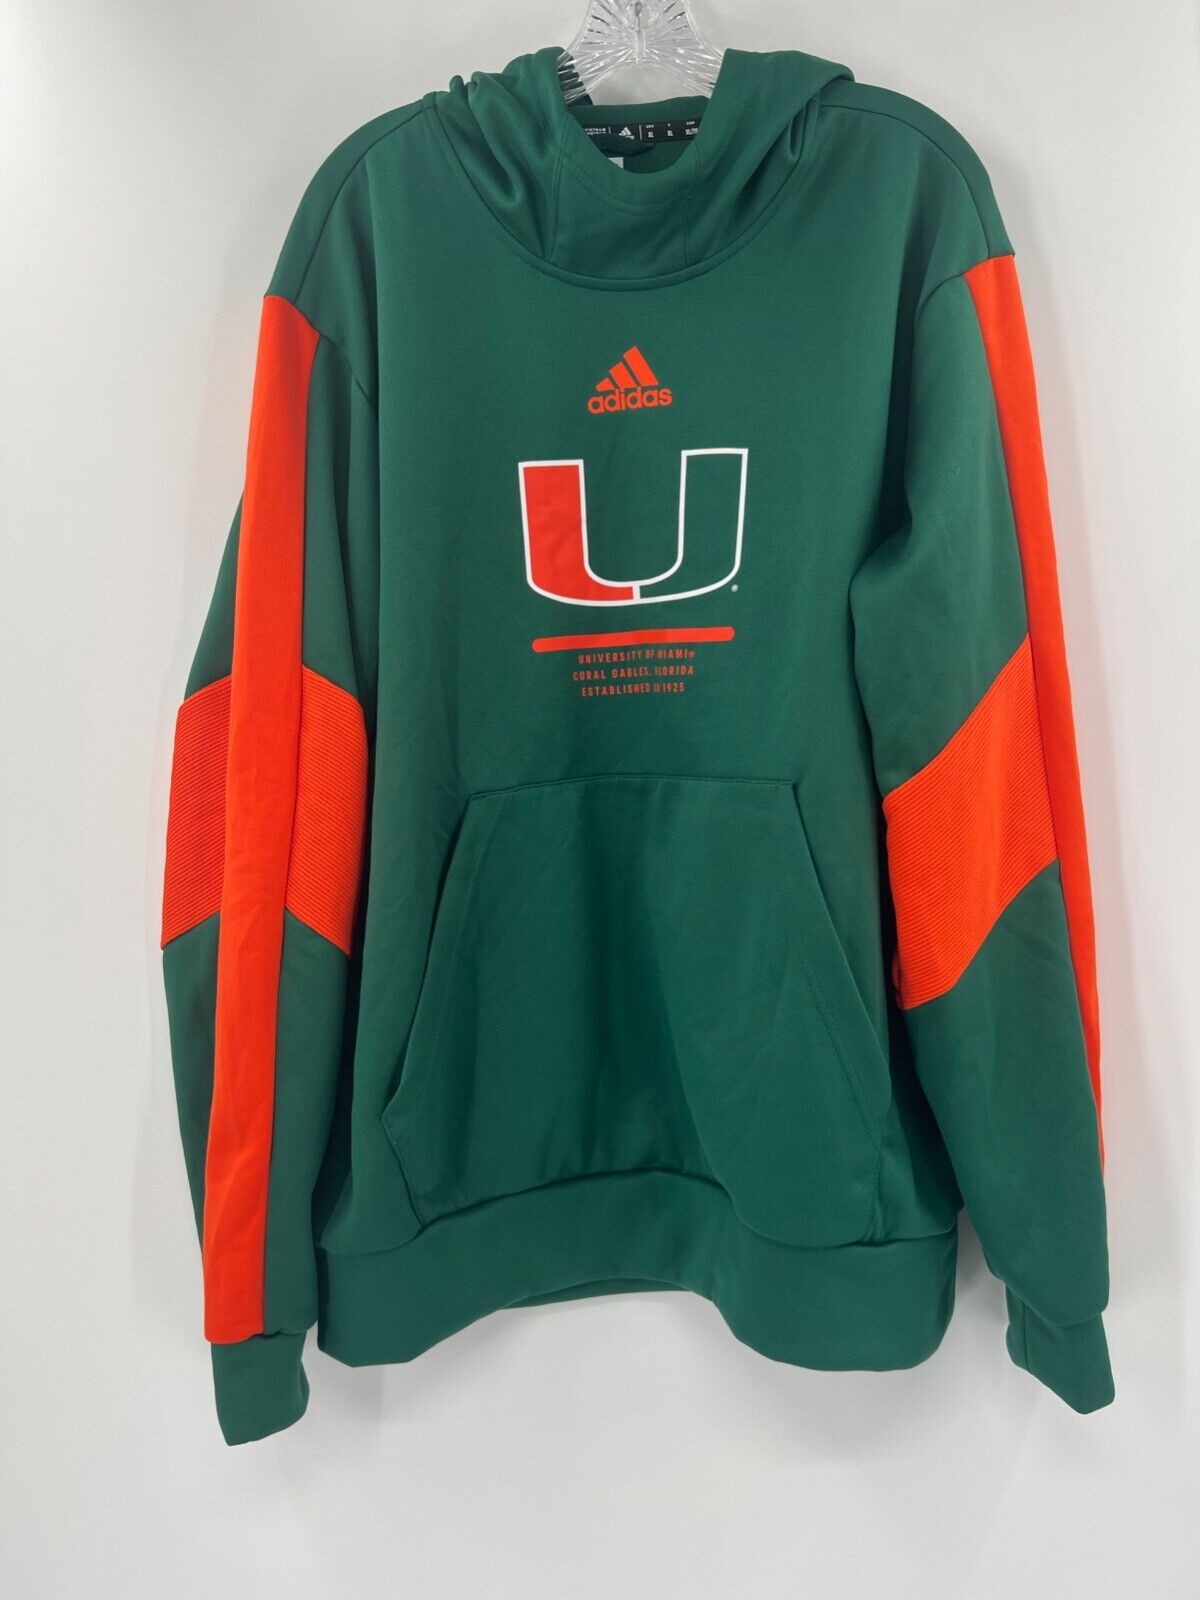 Miami Hurricanes Game Used Green Adidas Sweater With Hoodie And Pockets Size Xl